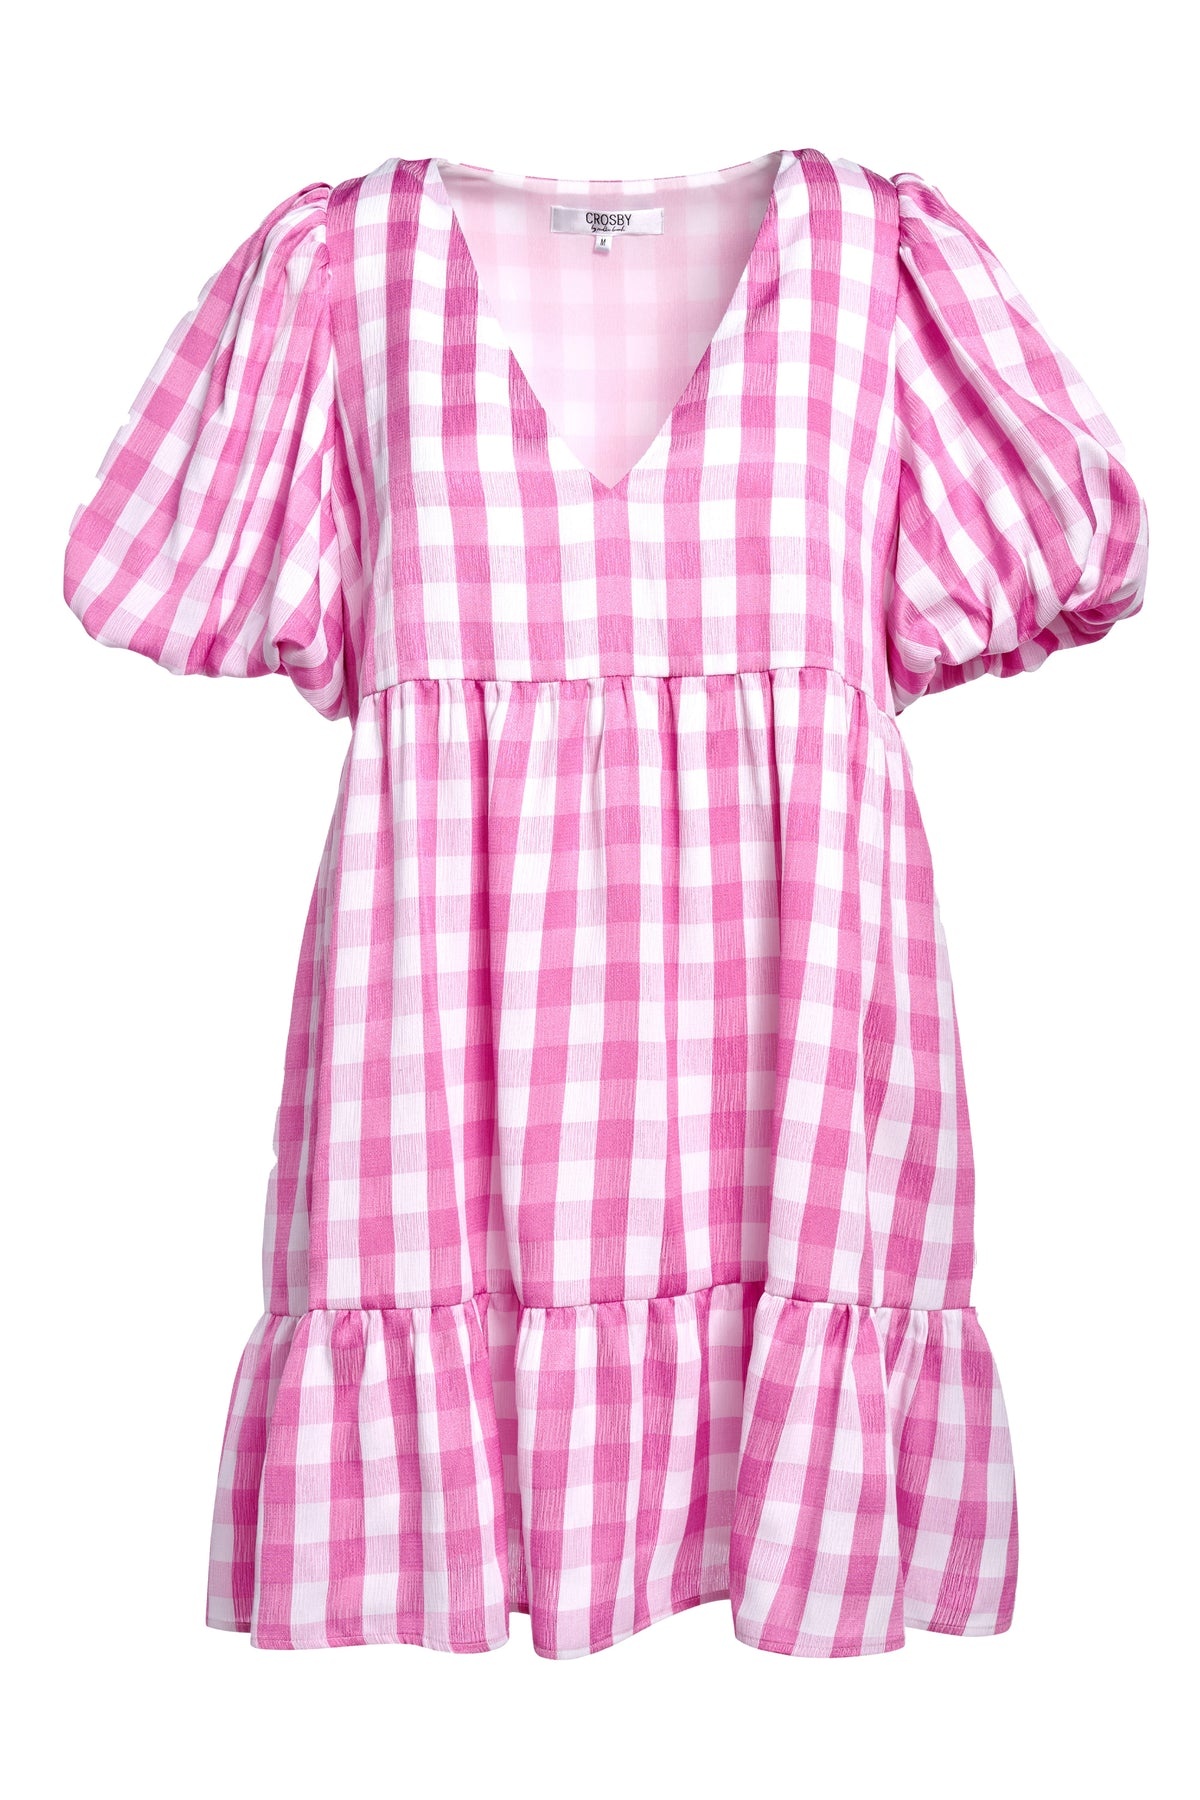 Crosby By Mollie Burch Izzy Dress Pink Gingham